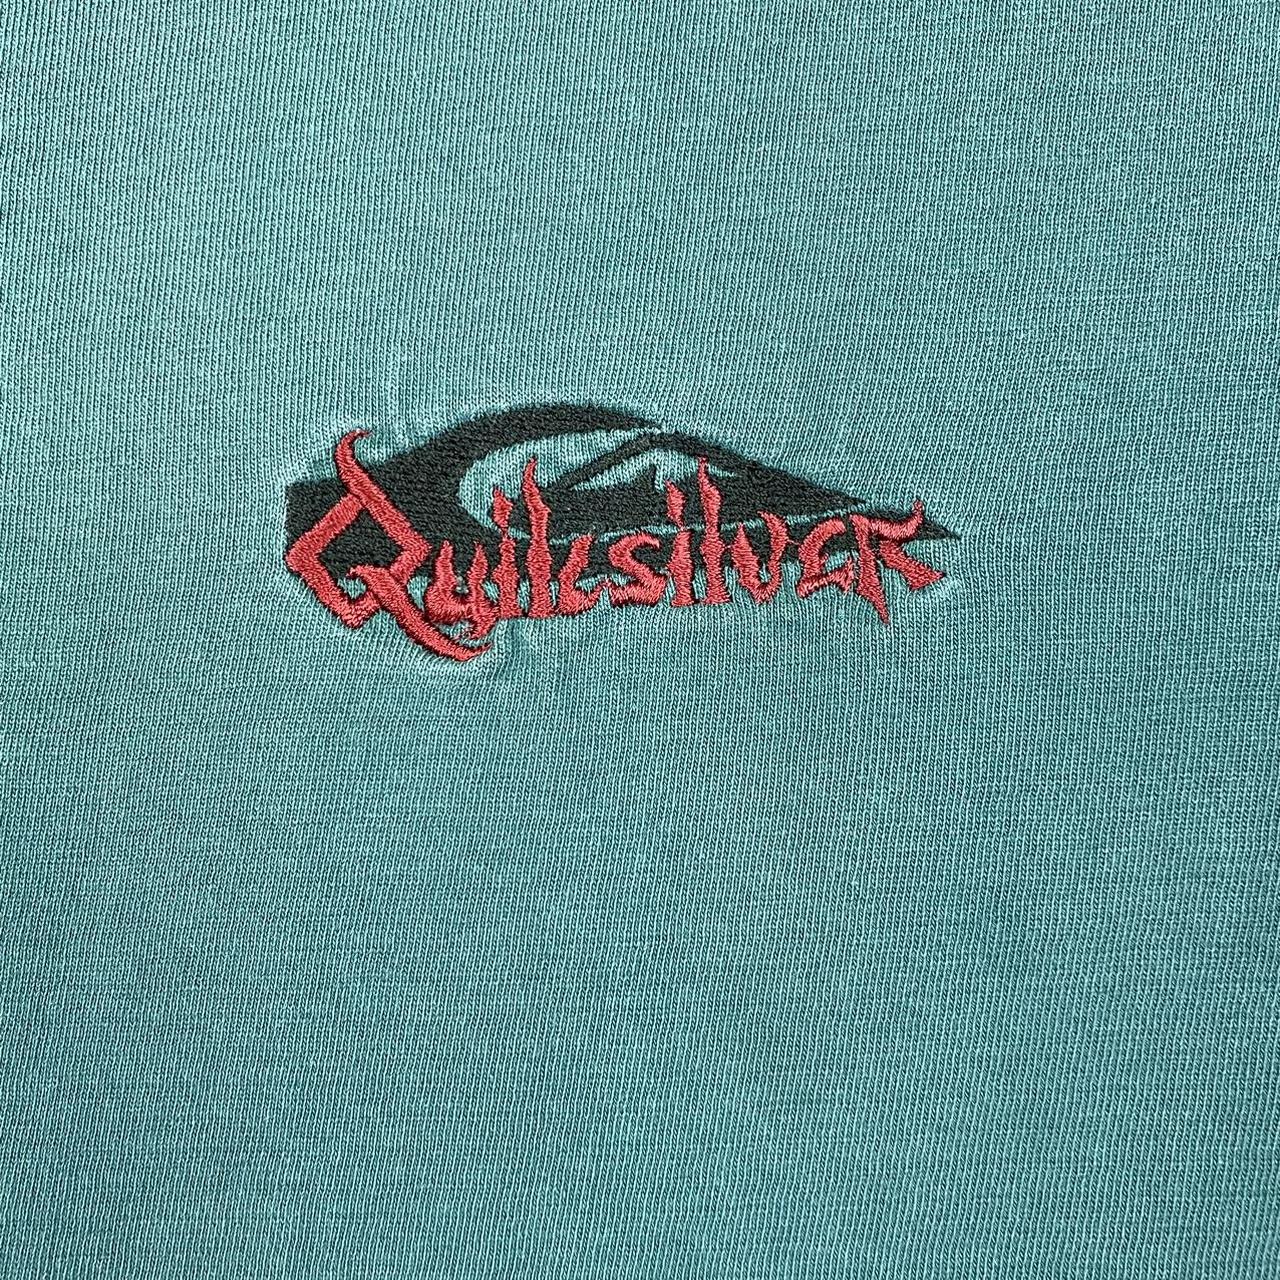 Quiksilver Men's Blue and Red T-shirt (2)